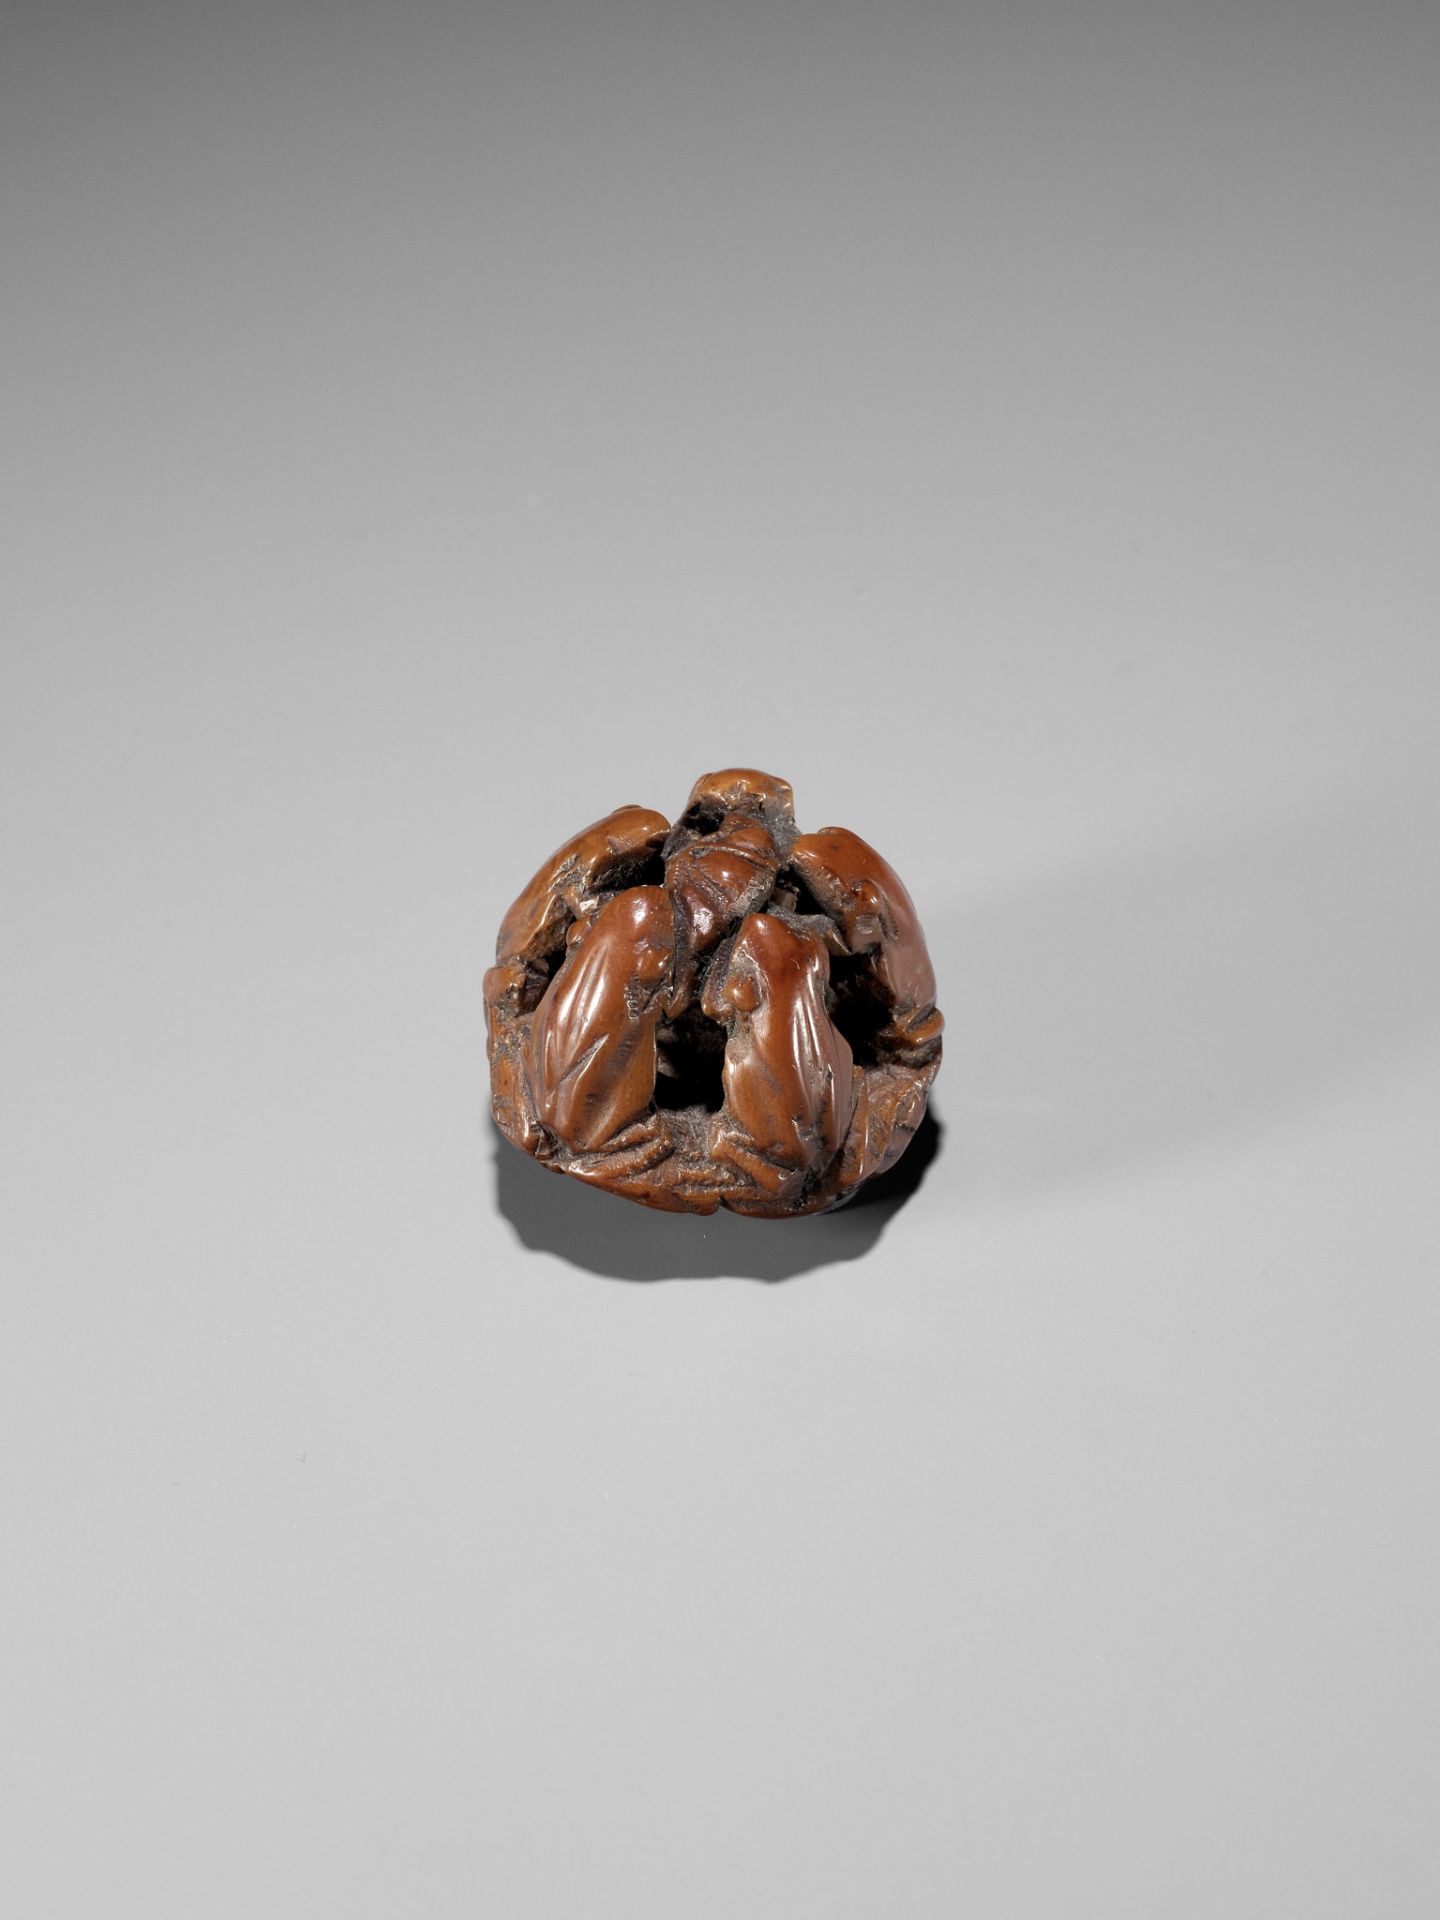 A RARE NUT NETSUKE OF FIVE FROGS ON A LOTUS LEAF, ATTRIBUTED TO SEIMIN - Image 3 of 9